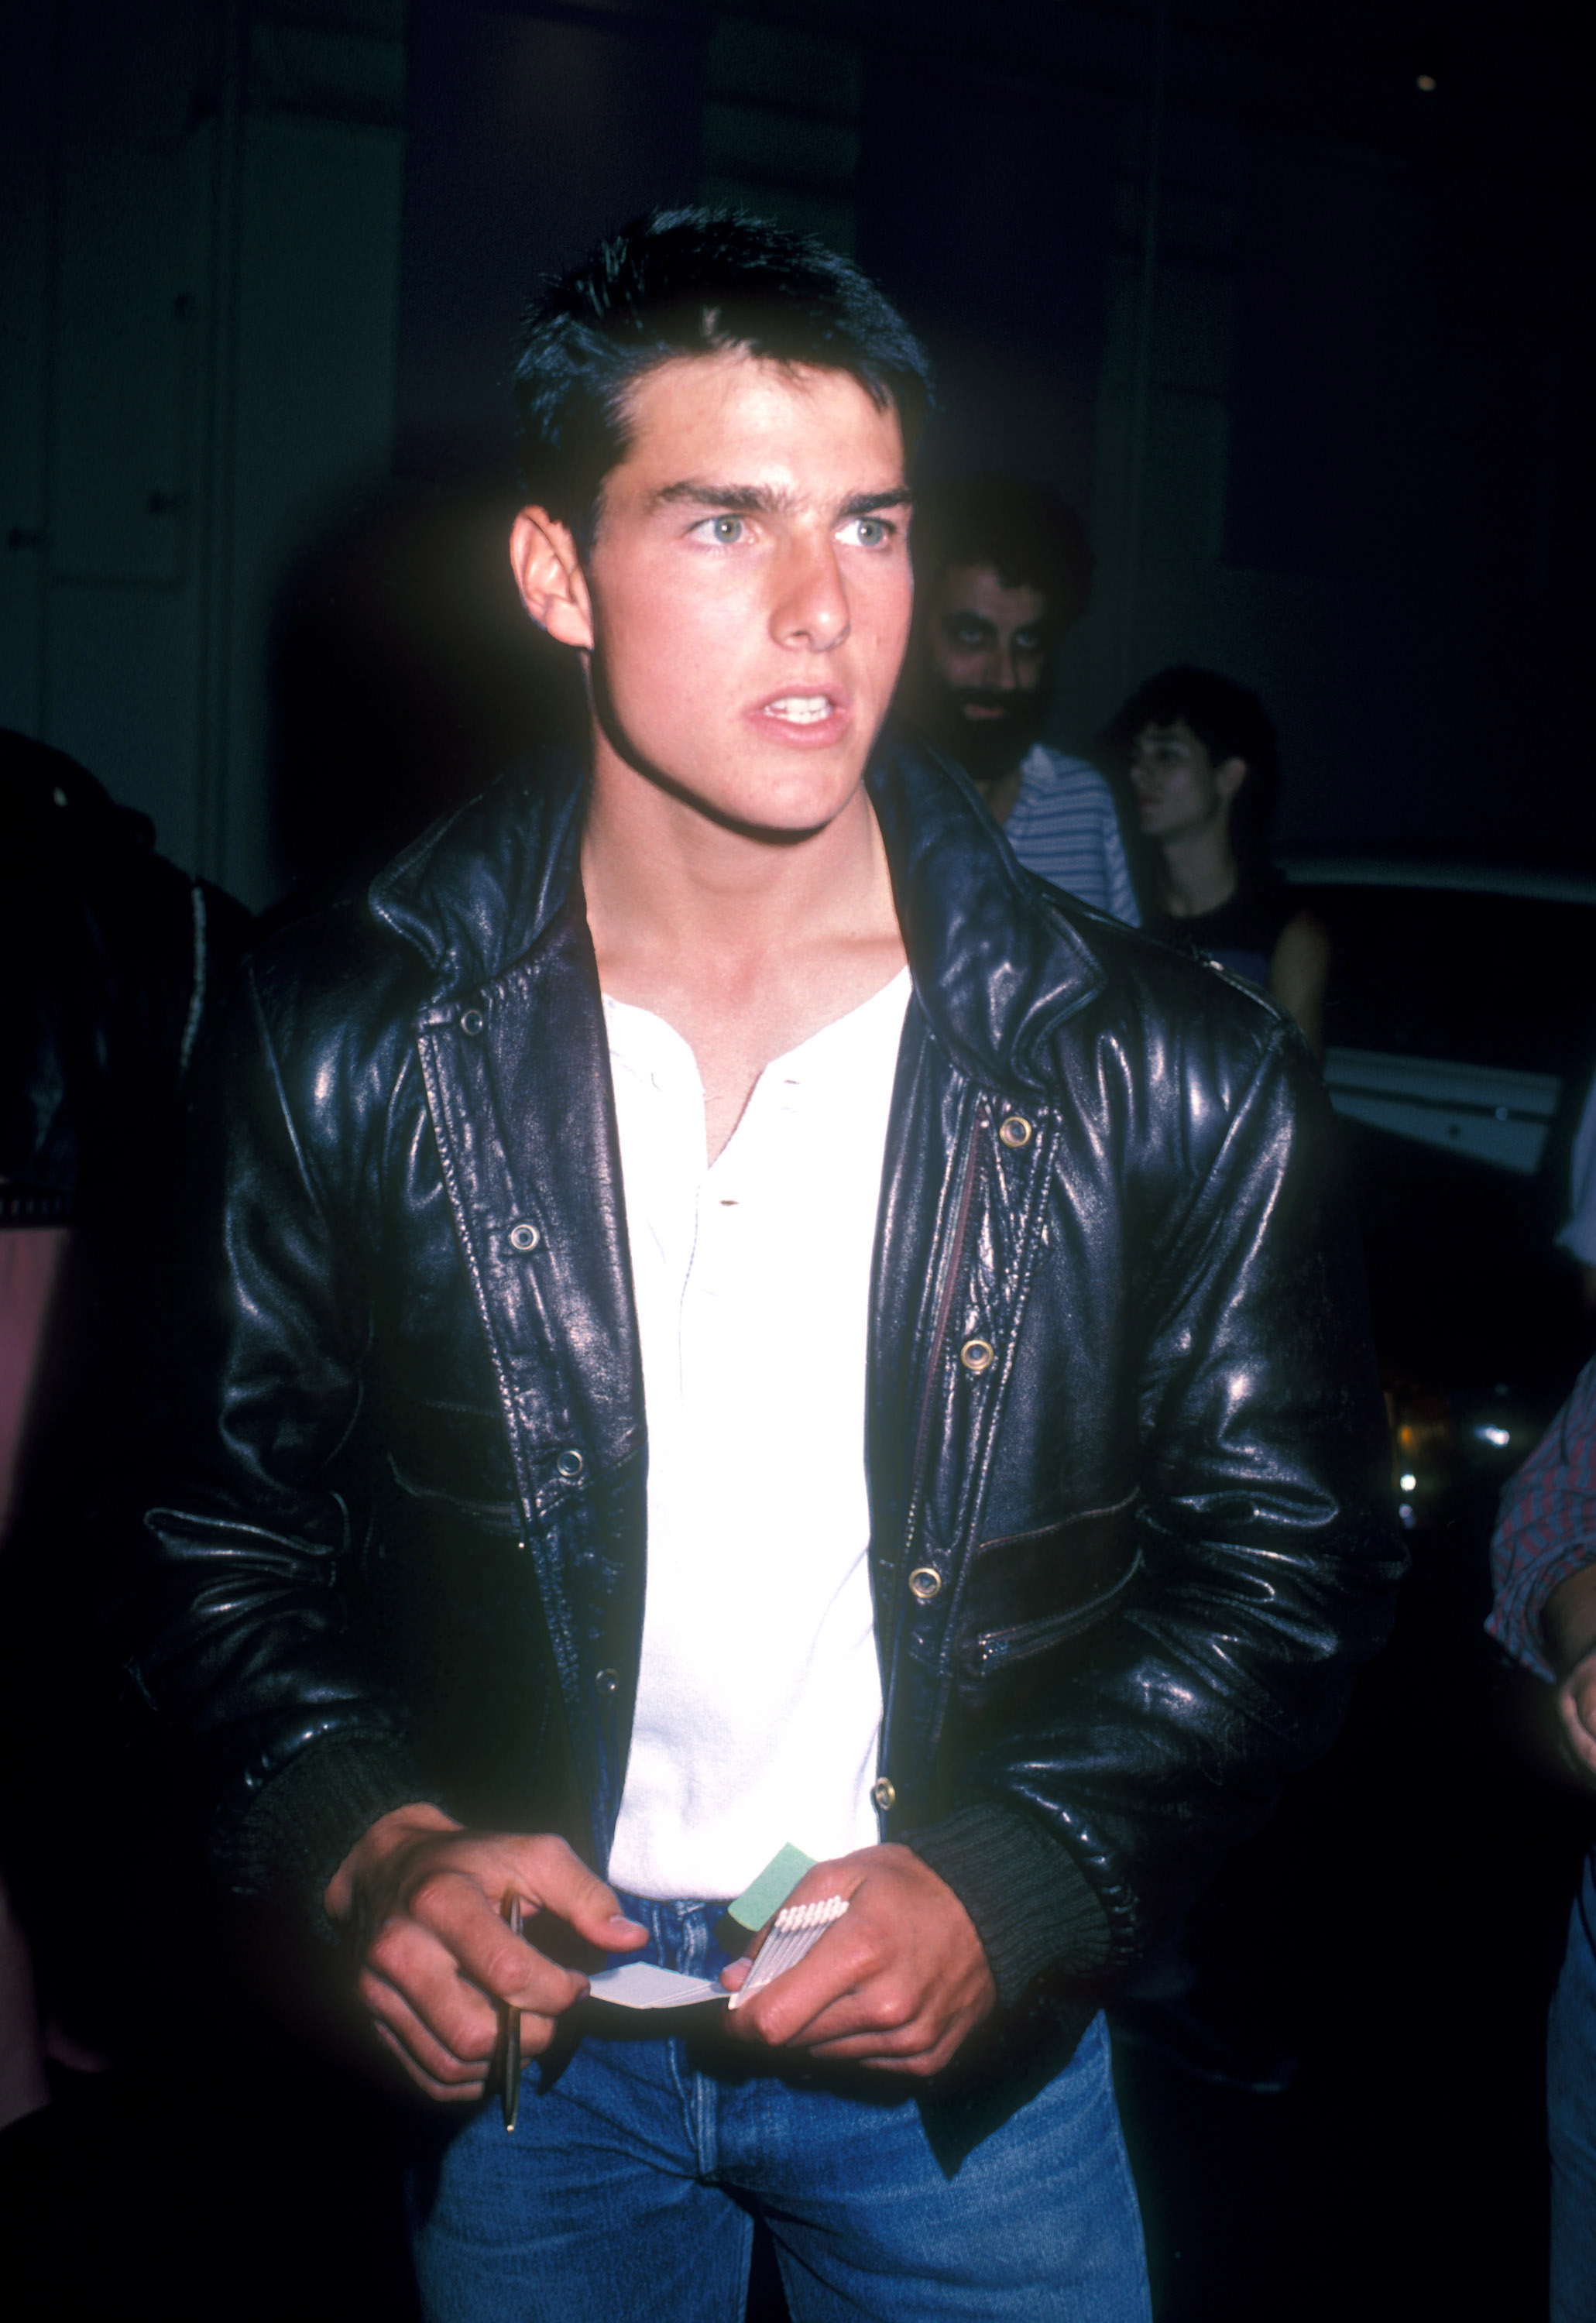 Tom Cruise attends Sean Penn's bachelor party in West Hollywood, California | Source: Getty Images